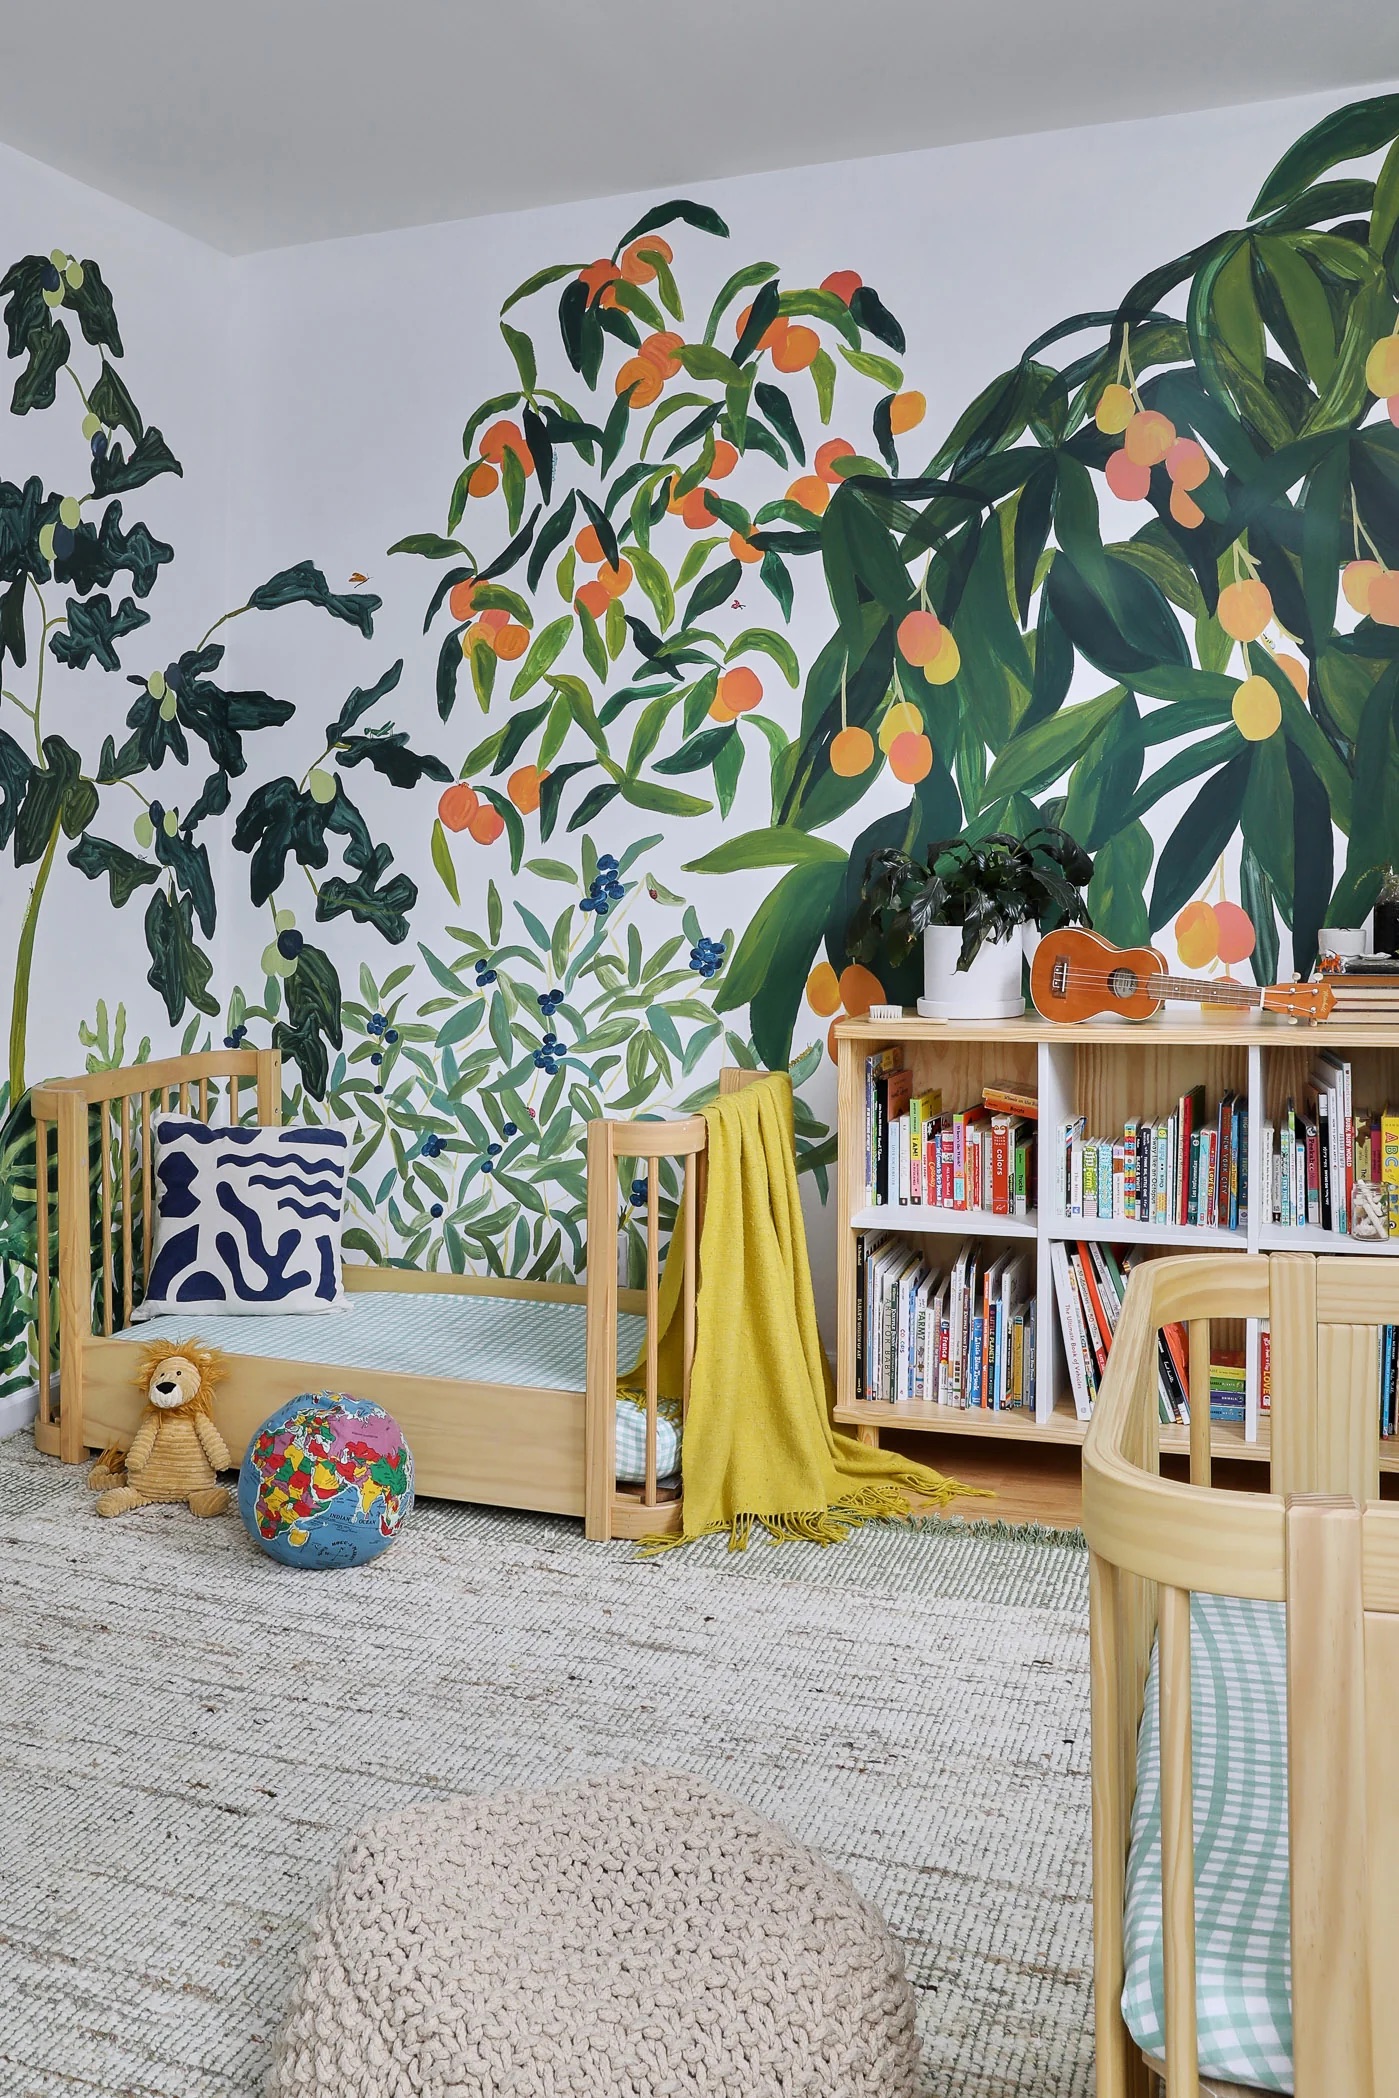 A colorful and vibrant children's bedroom with a botanical wallpaper, wooden furniture, and plush toys.